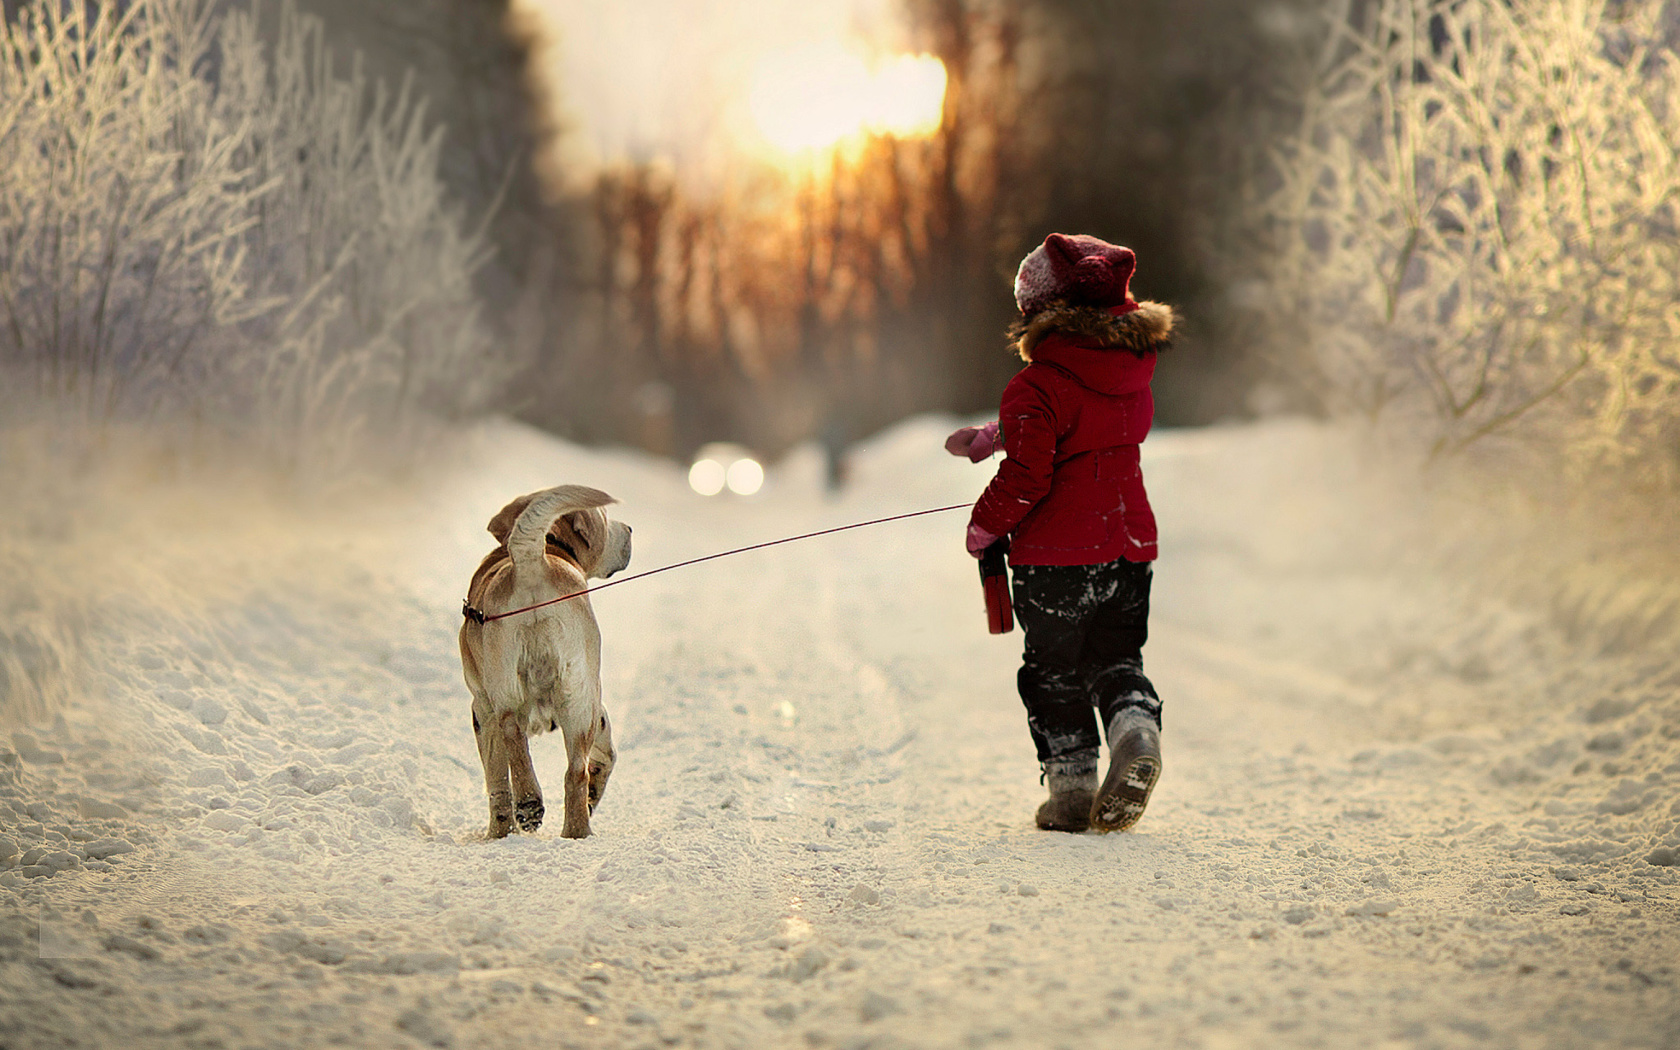 Winter Walking with Dog wallpaper 1680x1050